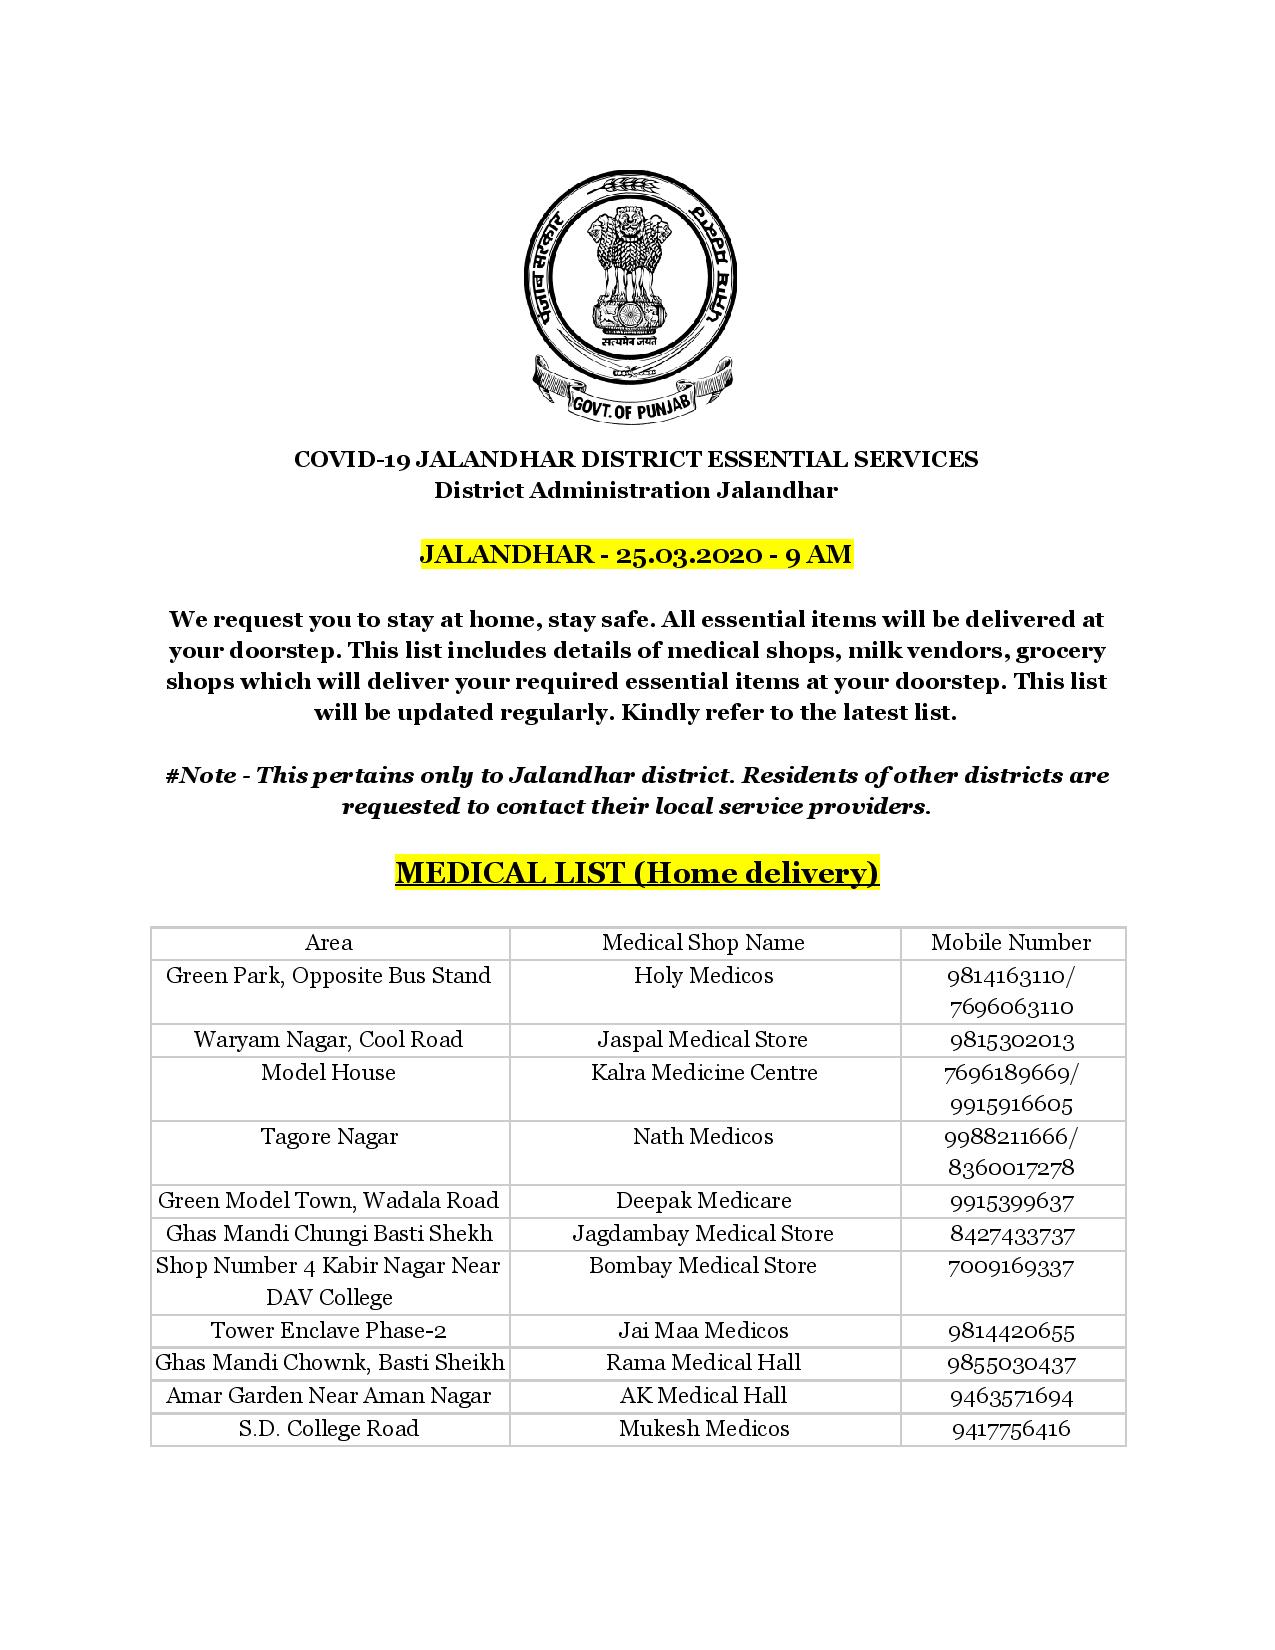 Jalandhar district releases the list of shopkeepers